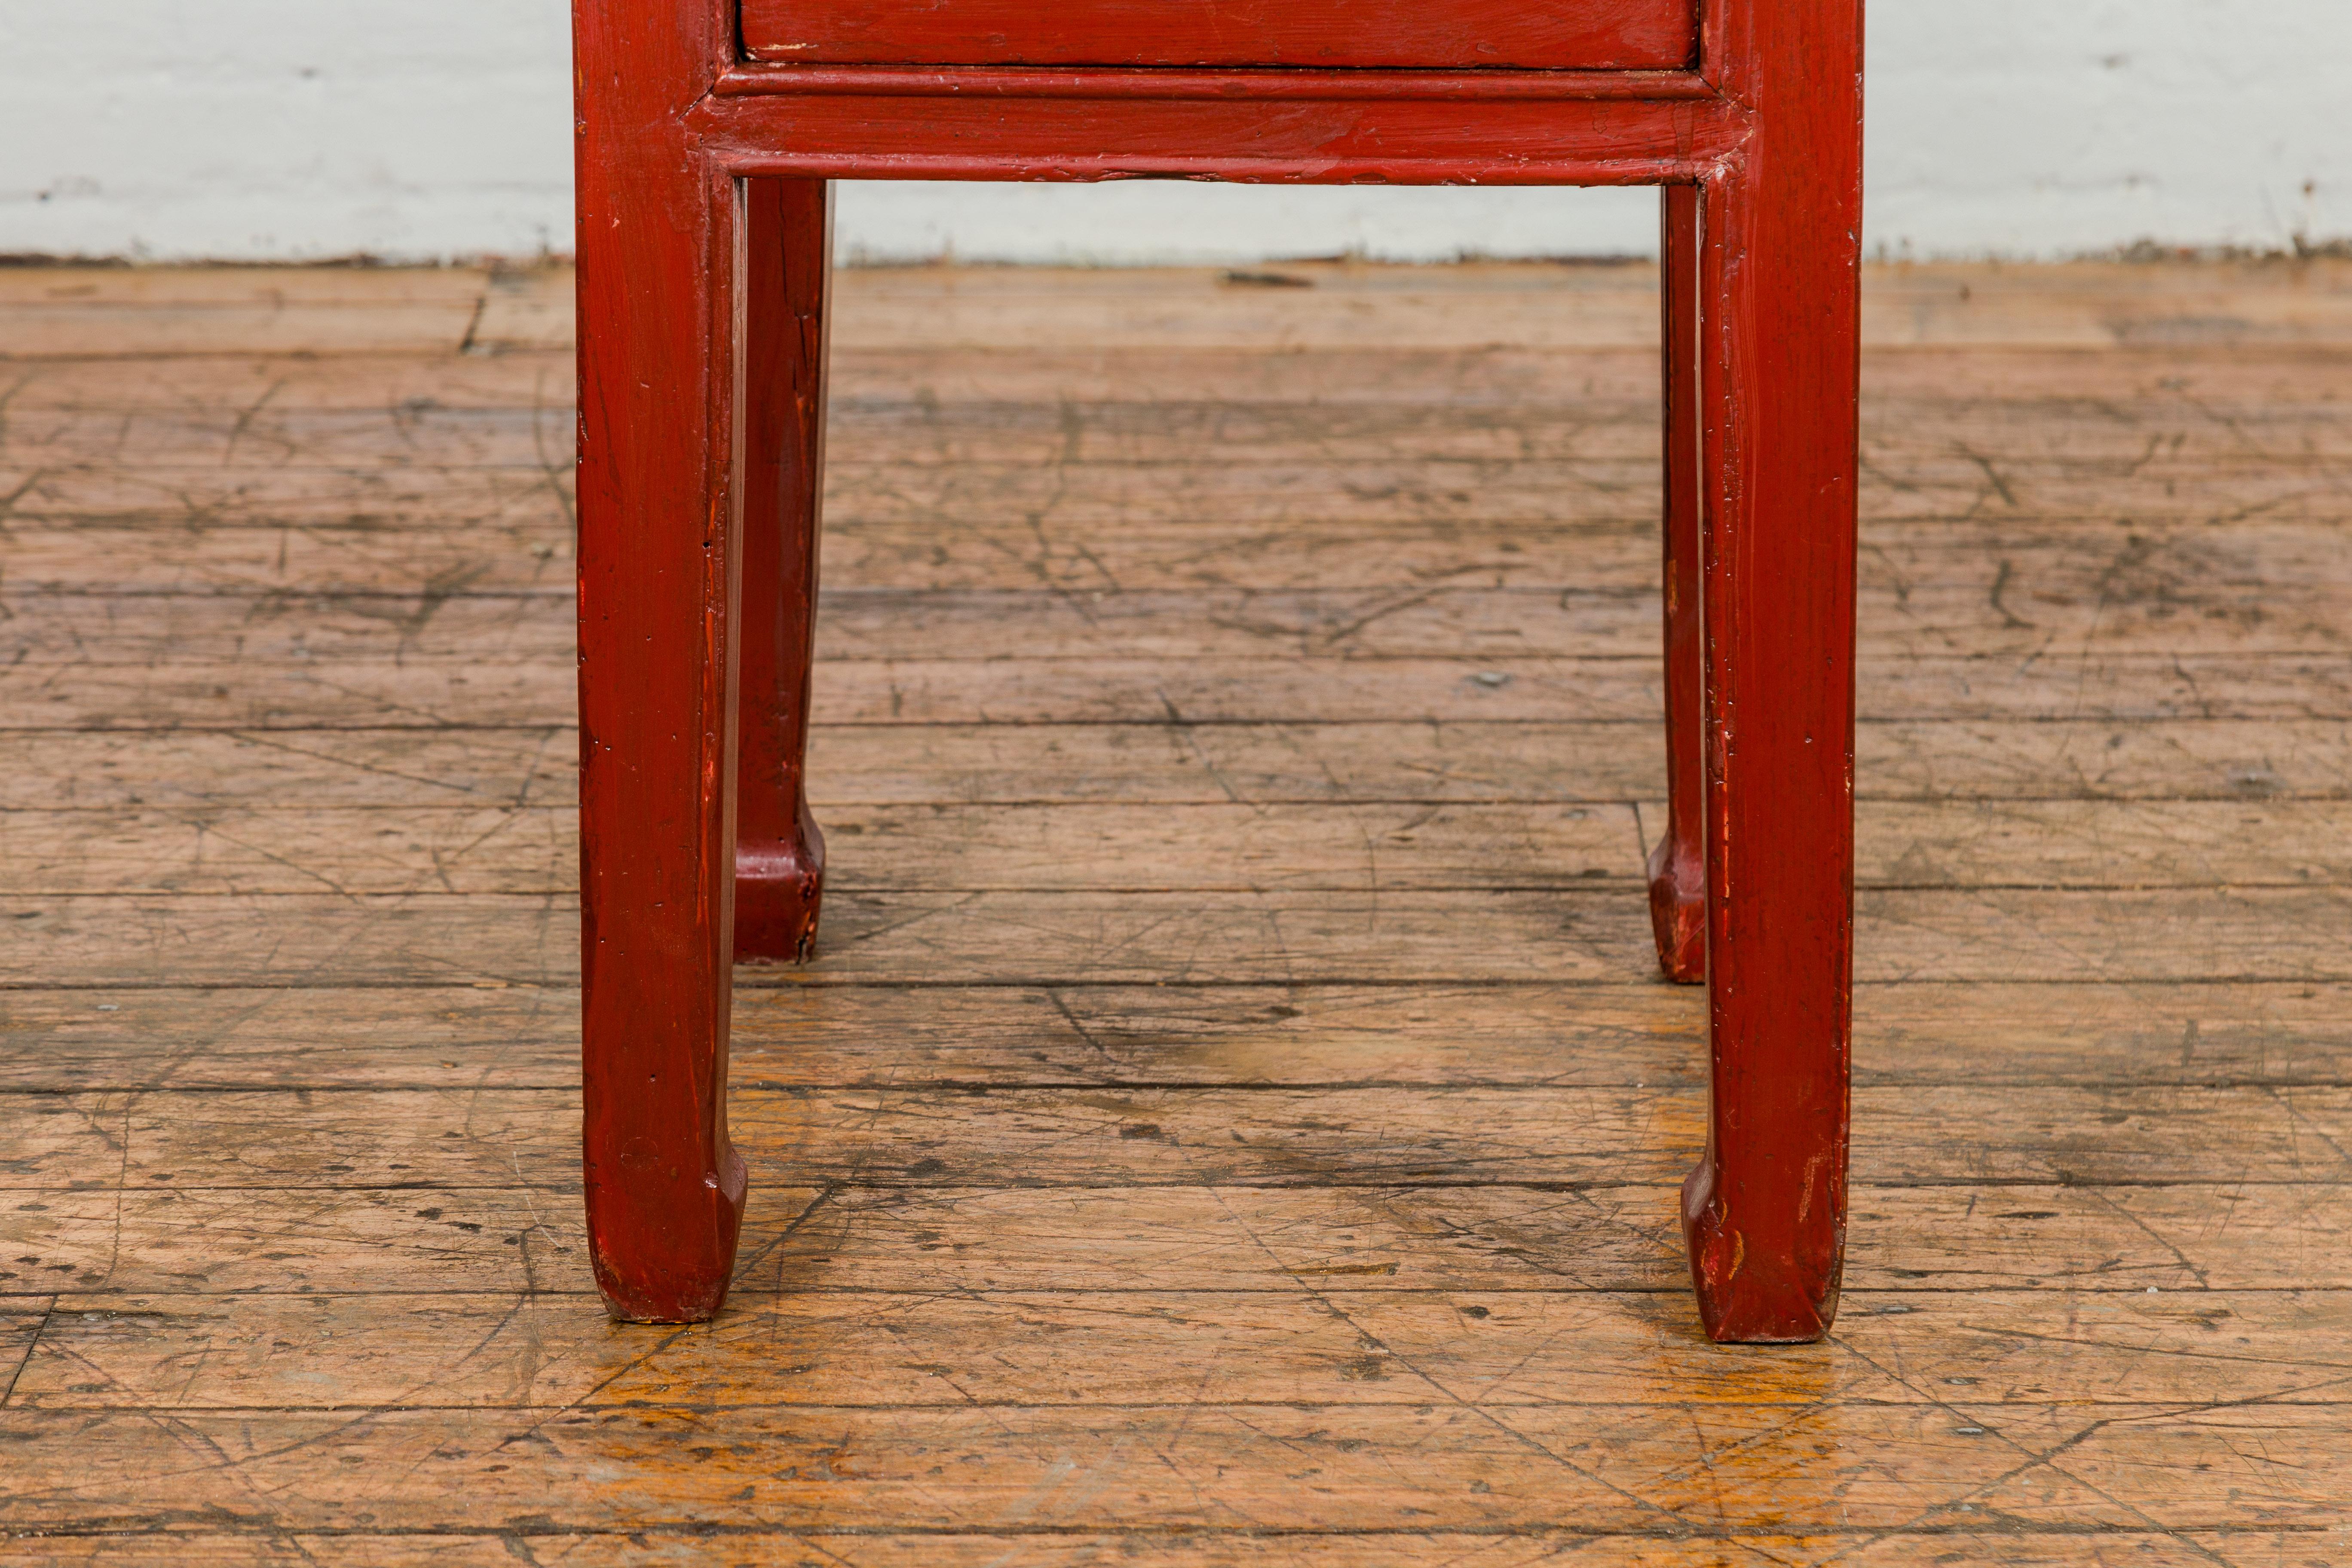 Late Qing Dynasty Red Lacquer Side Table with Single Drawer and Horse Hoof Feet In Good Condition For Sale In Yonkers, NY